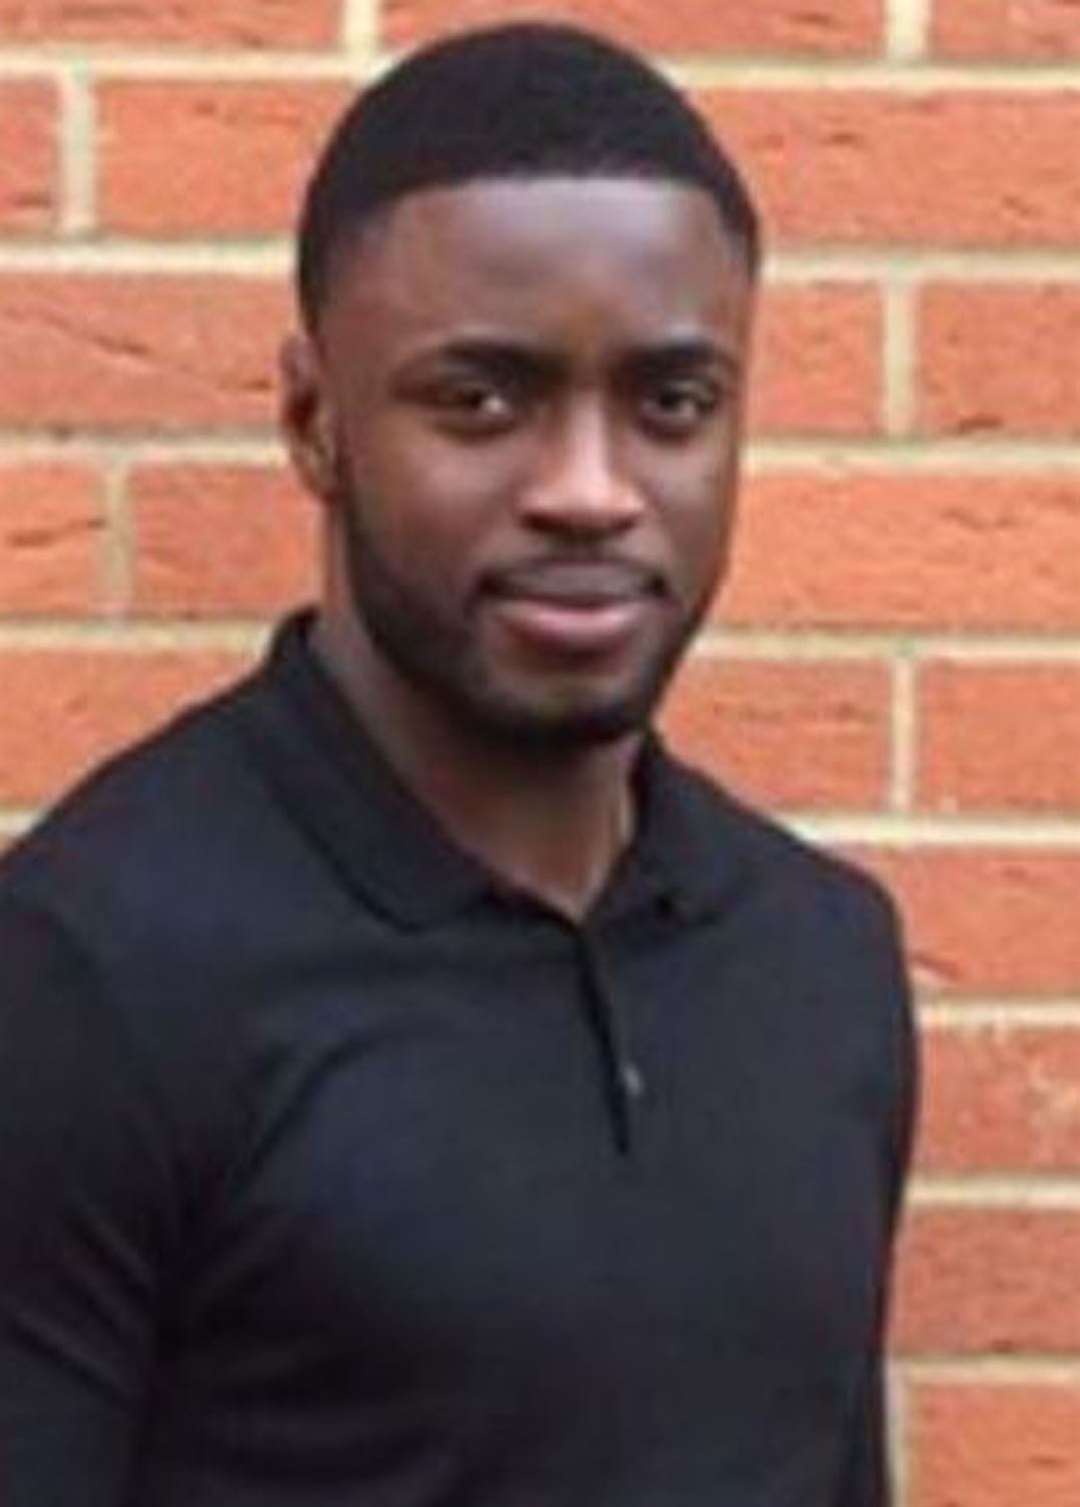 Abraham Badru was gunned down after pulling up near his home in Hackney, east London, on March 25 2018 (Family handout/PA)